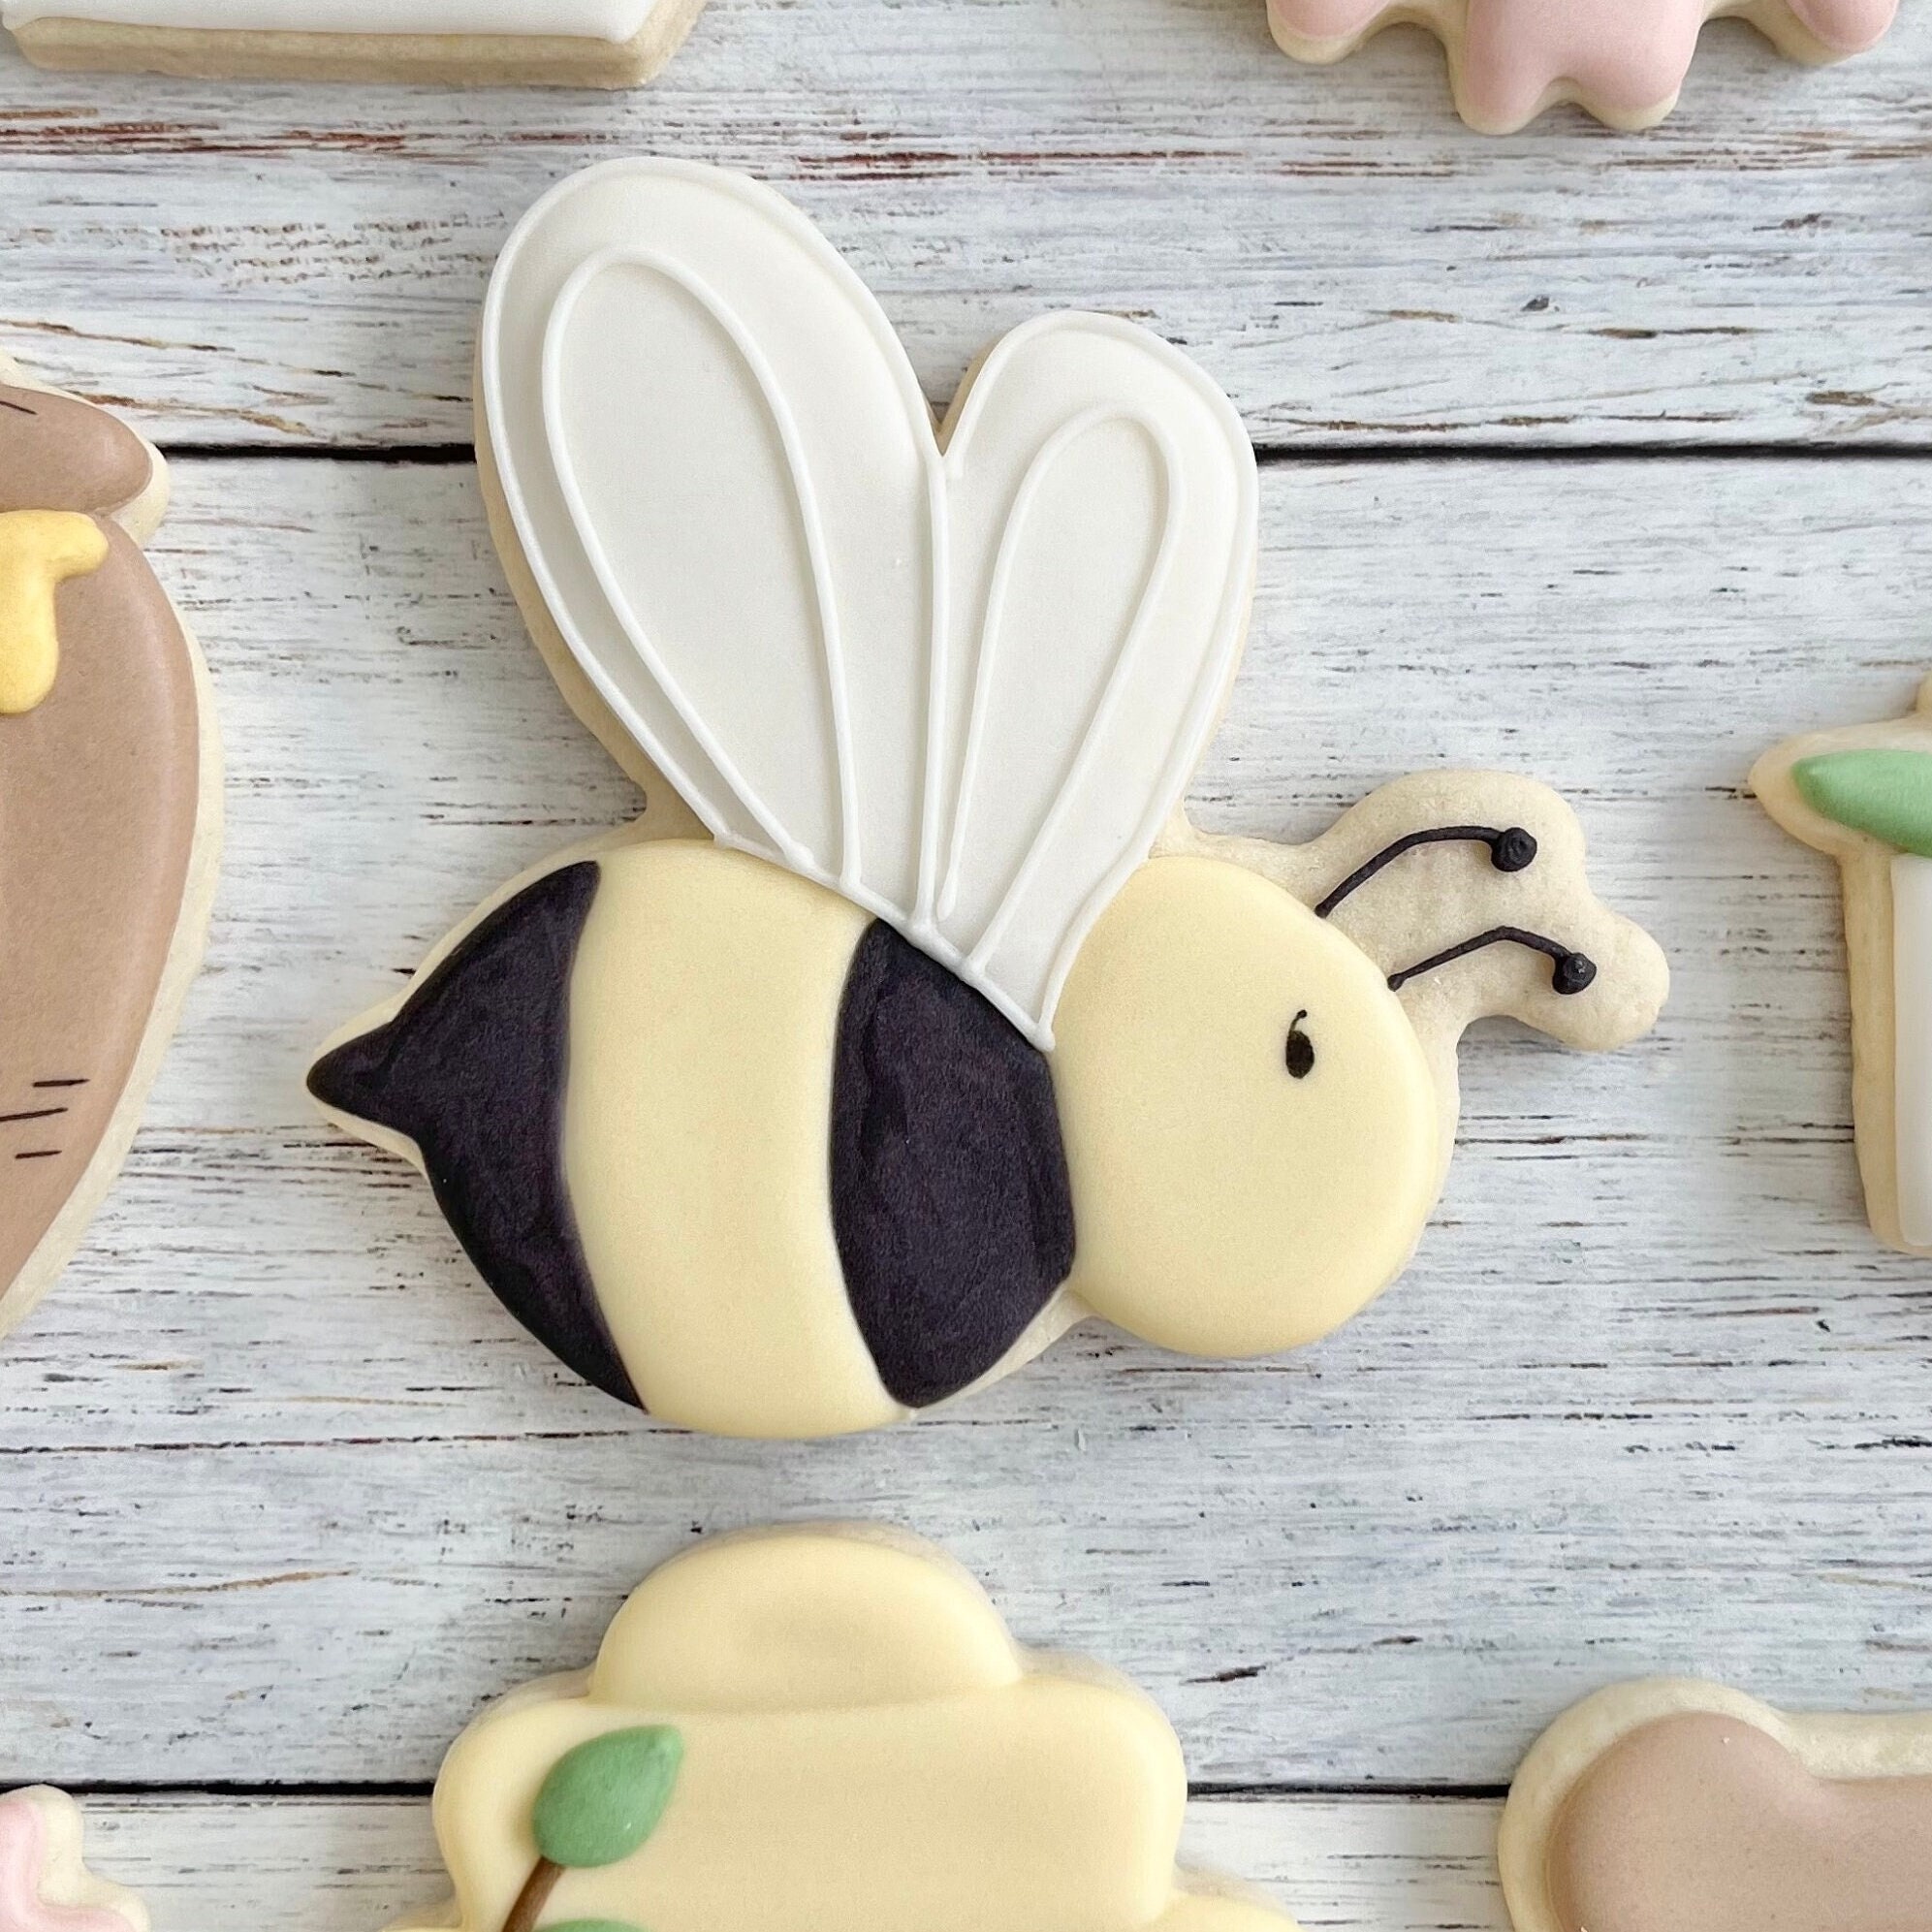 24 BUMBLE BEE EDIBLE Sugar Cupcake or Cake Toppers by Decopac Bee  Decorations for Party Desserts, Birthdays, Spring Themed Party 